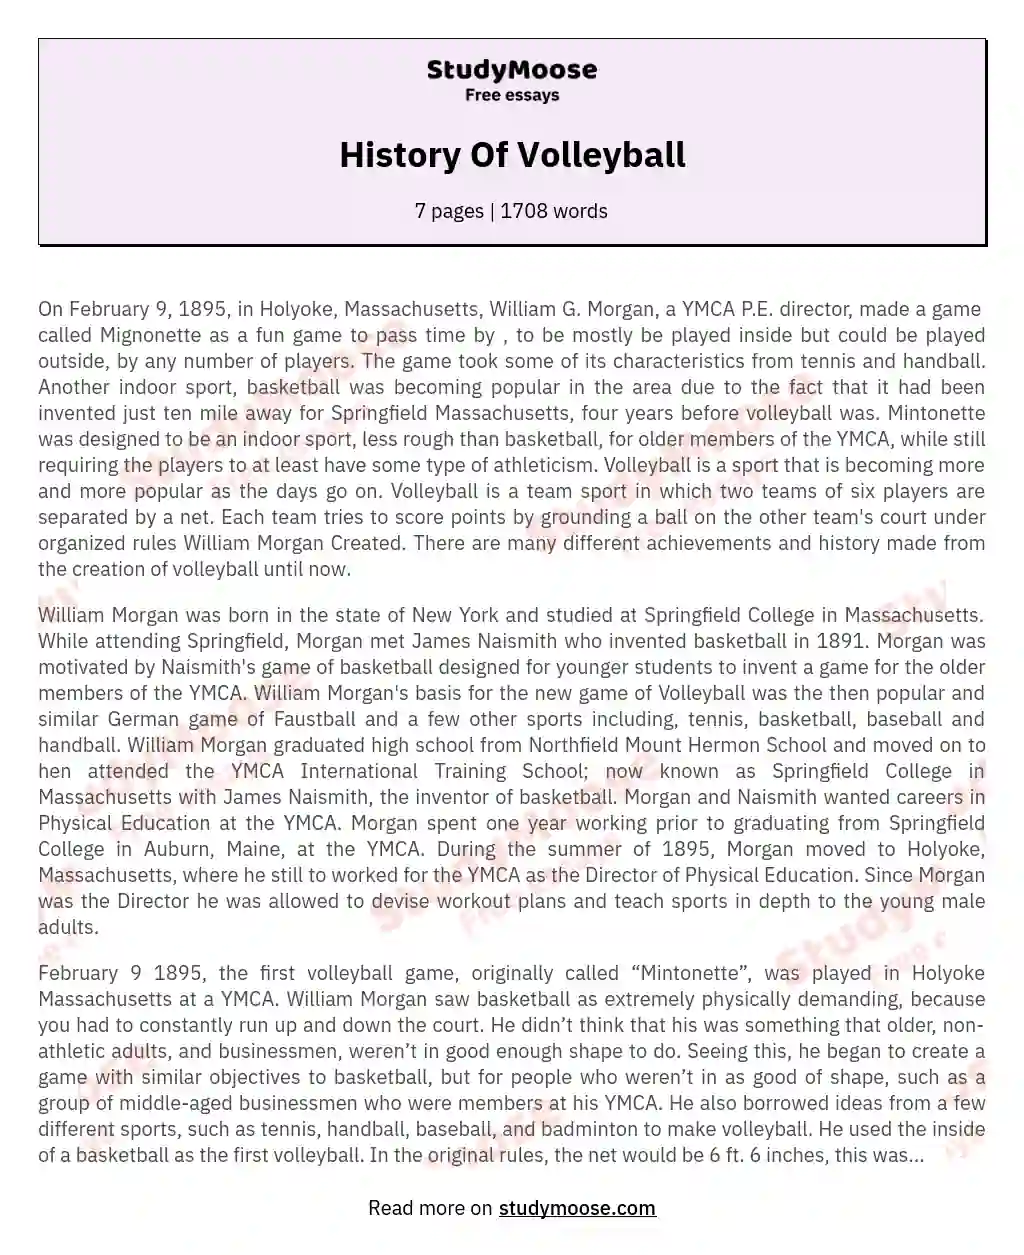 History Of Volleyball essay